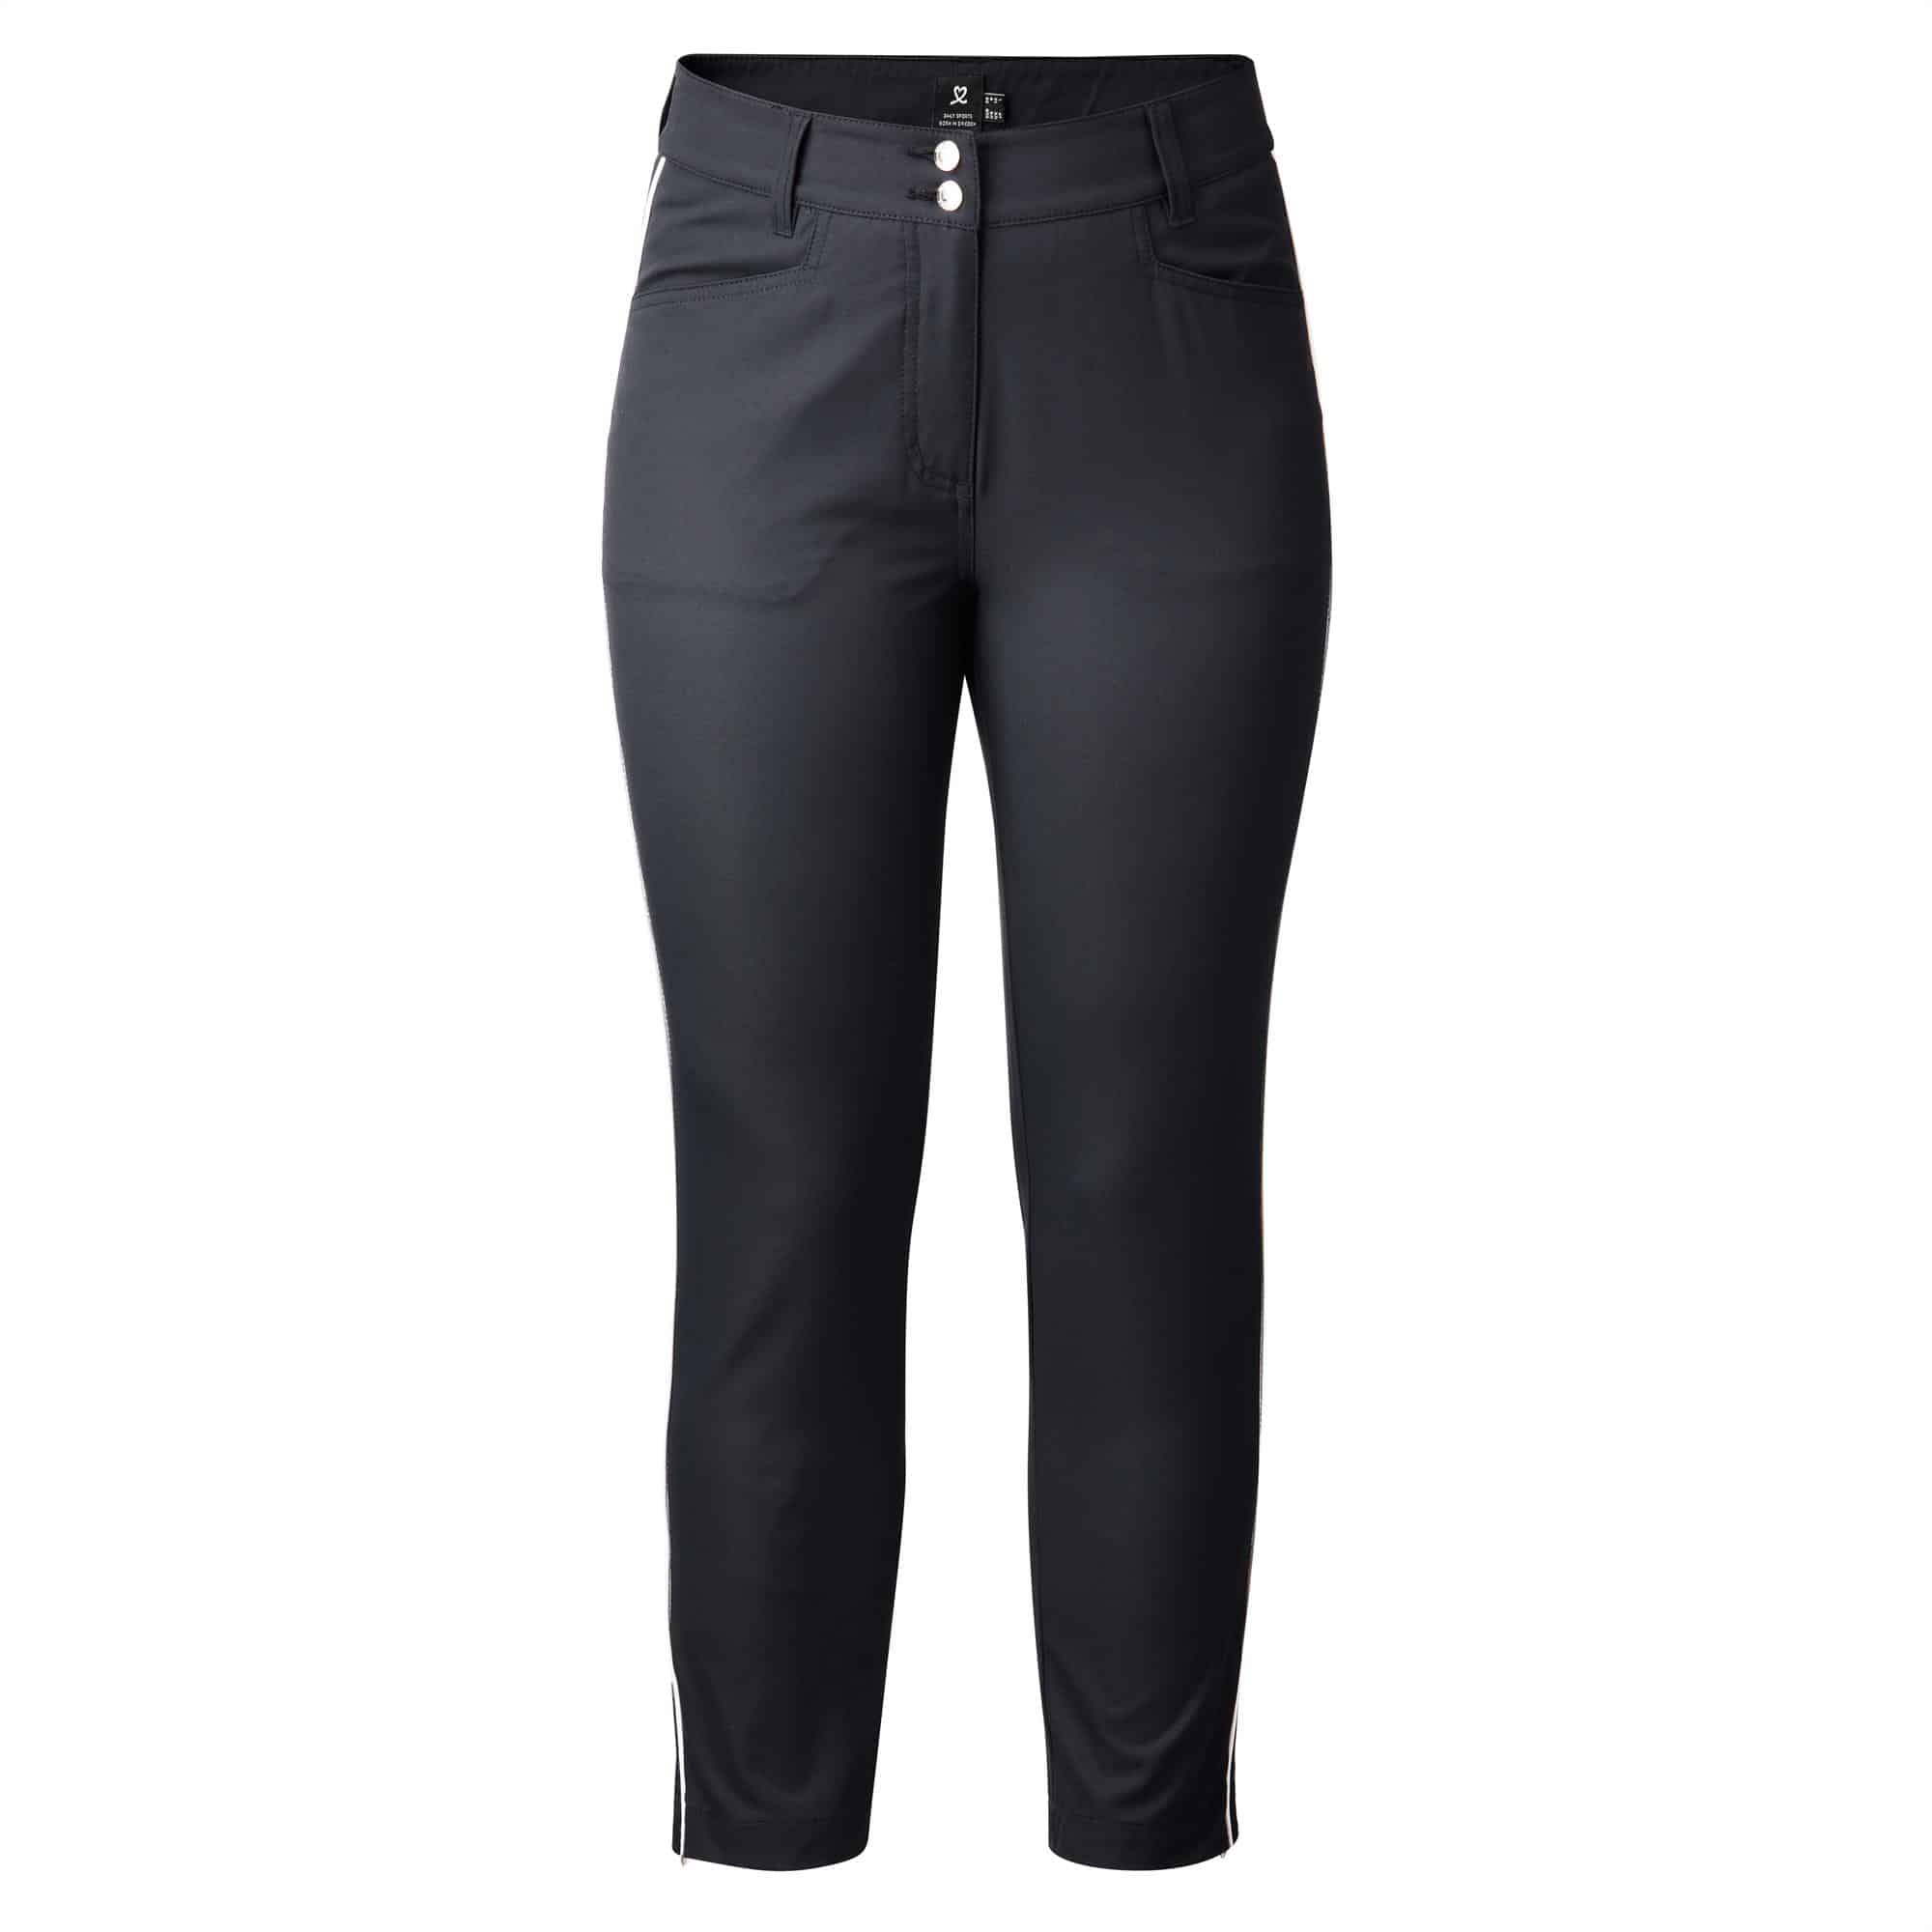 Daily Sport Miracle Black High Water 37 Pant – Peanuts and Golf